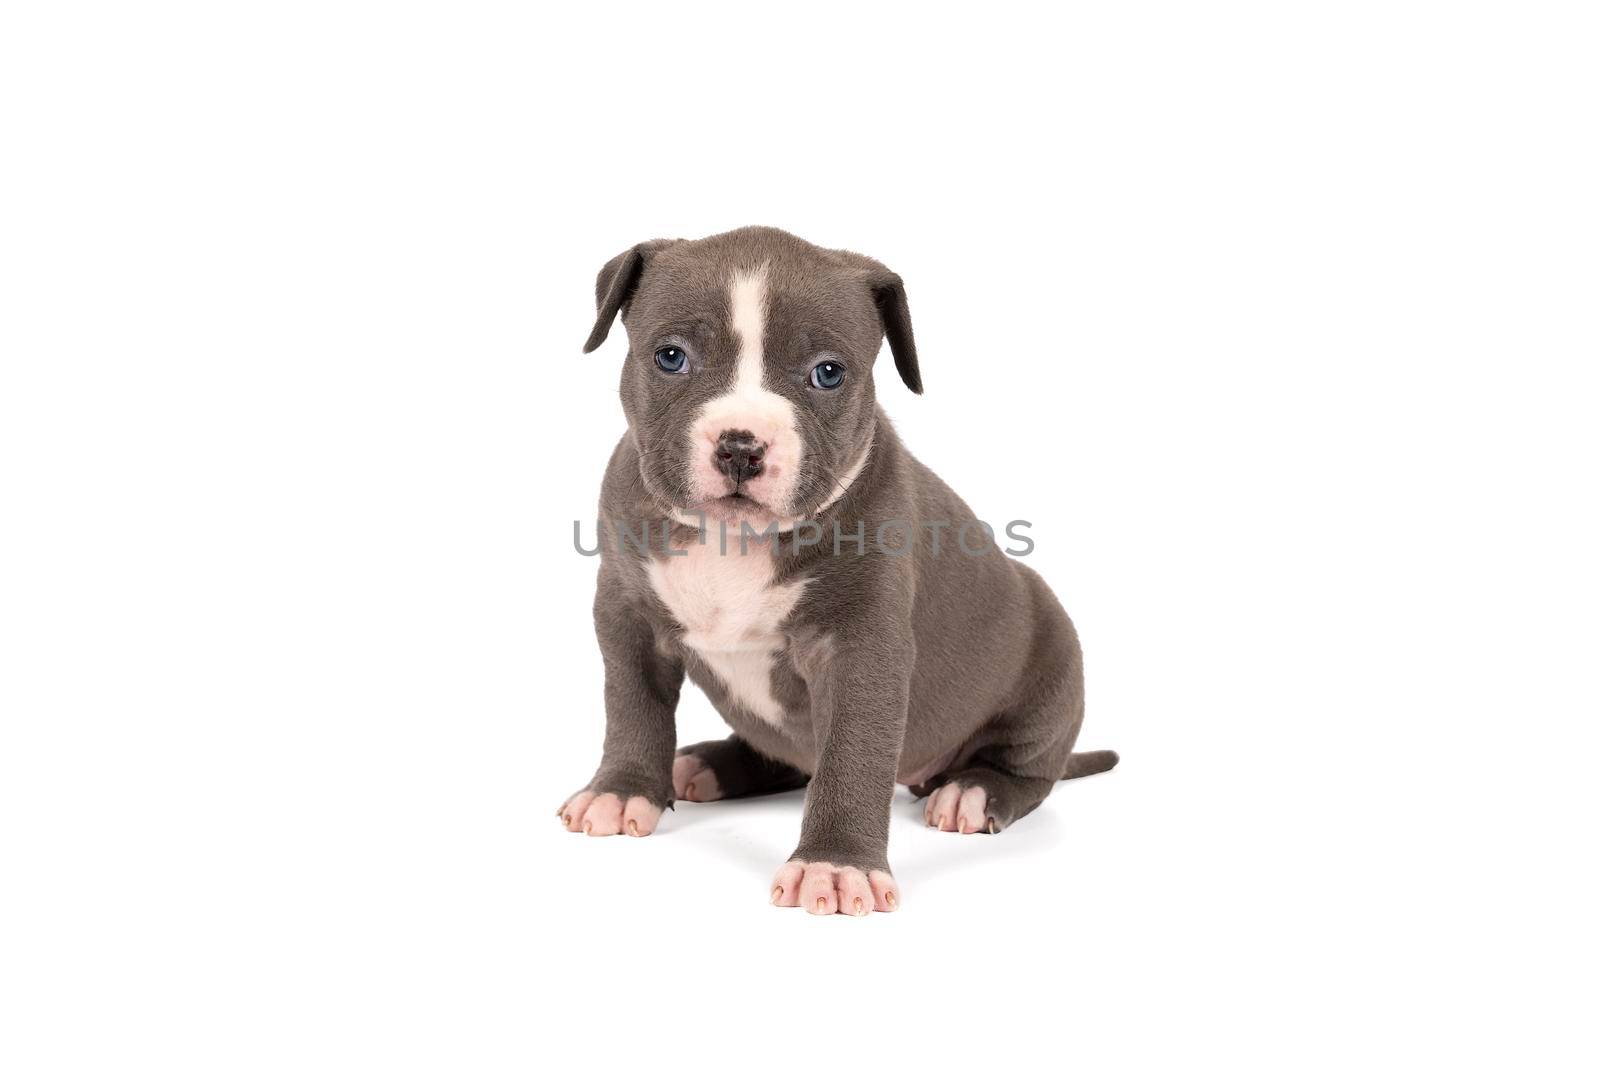 A purebred American Bully or Bulldog pup with blue and white fur sitting looking at the camera isolated on a white background